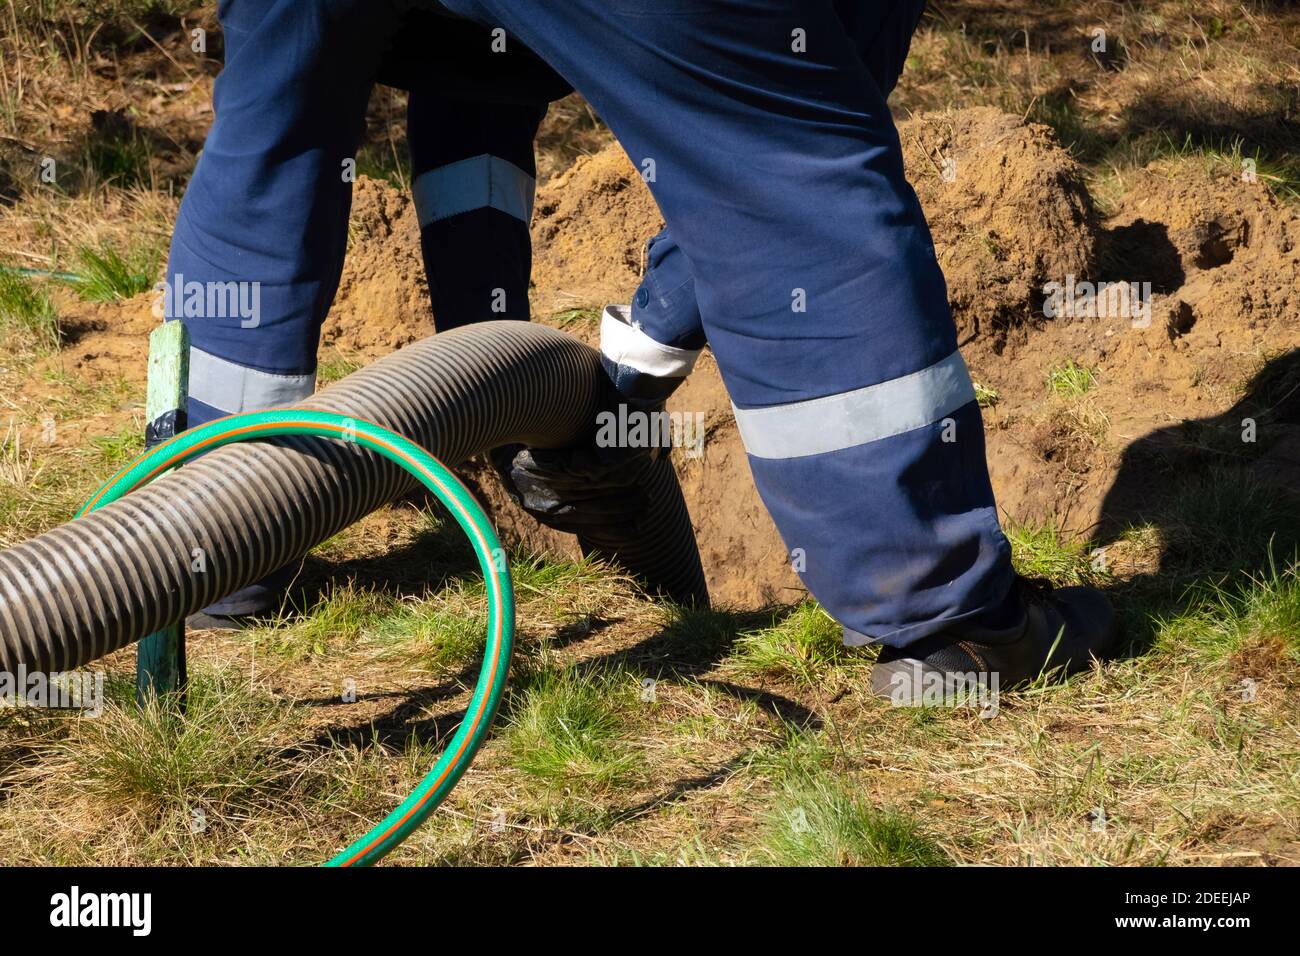 Caucasian Plumber Worker Wearing Safety Gloves Adjusting Water Sewage  Residential Stock Photo by ©welcomia 415928518